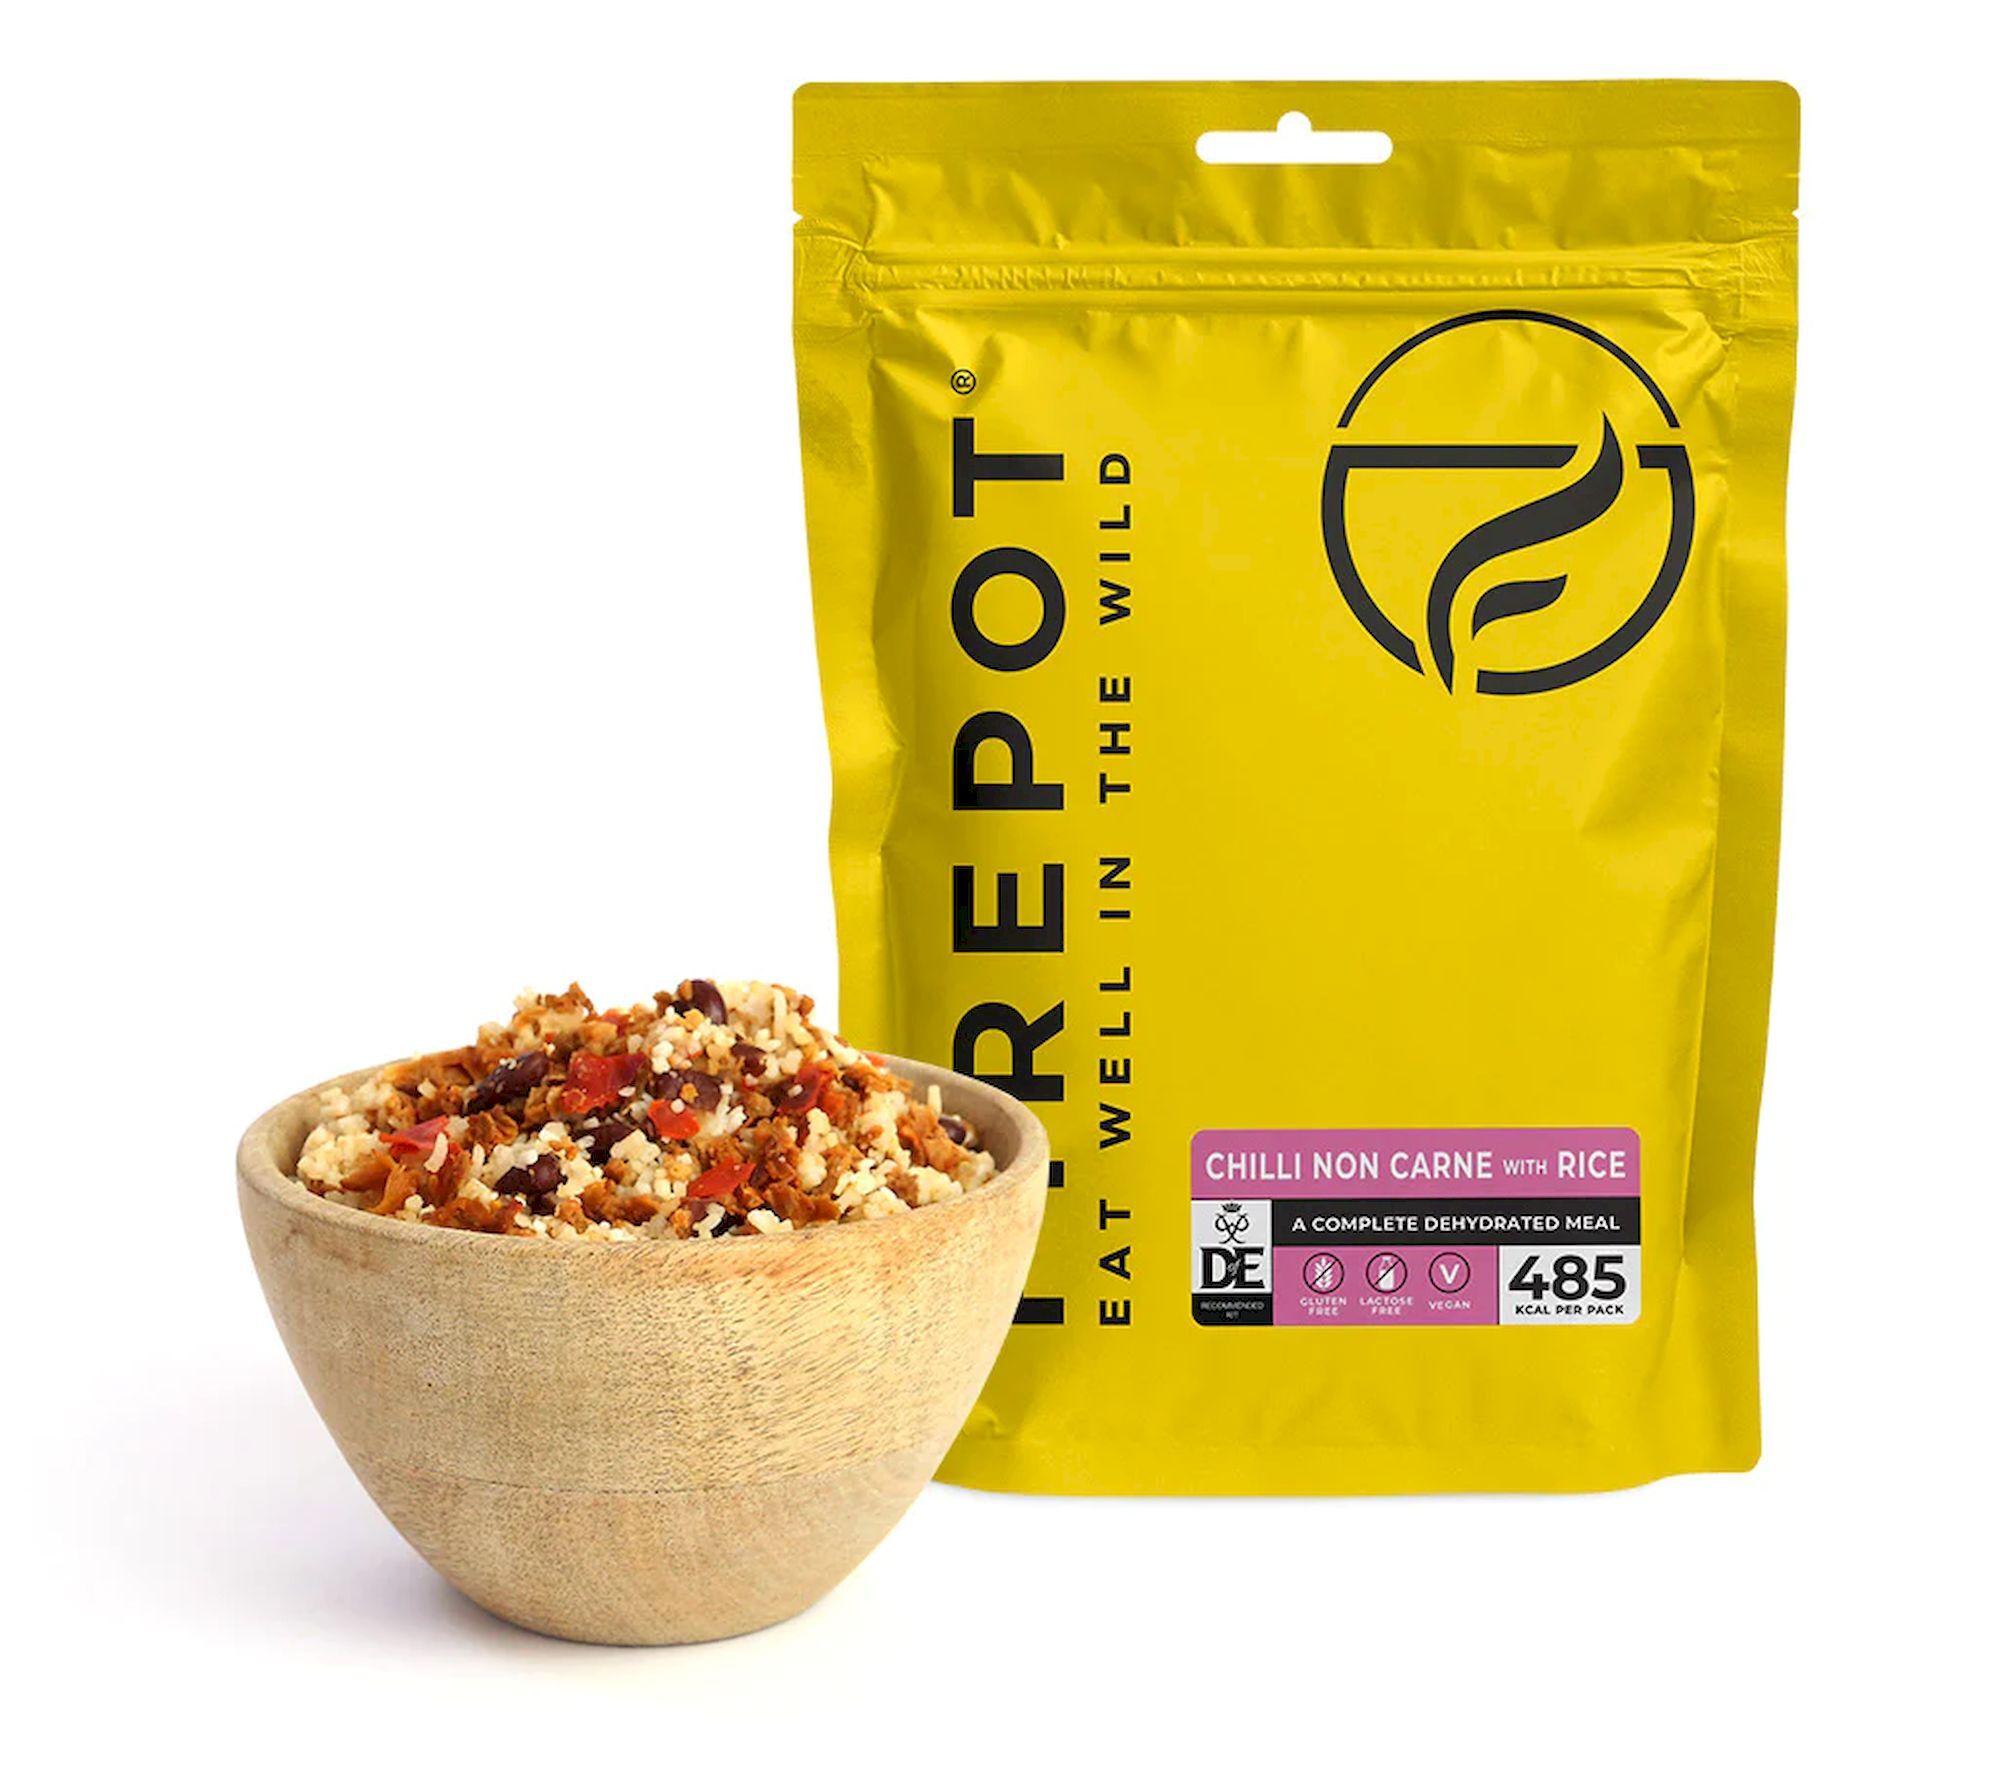 Firepot Chilli non Carne - Freeze-dried meals | Hardloop